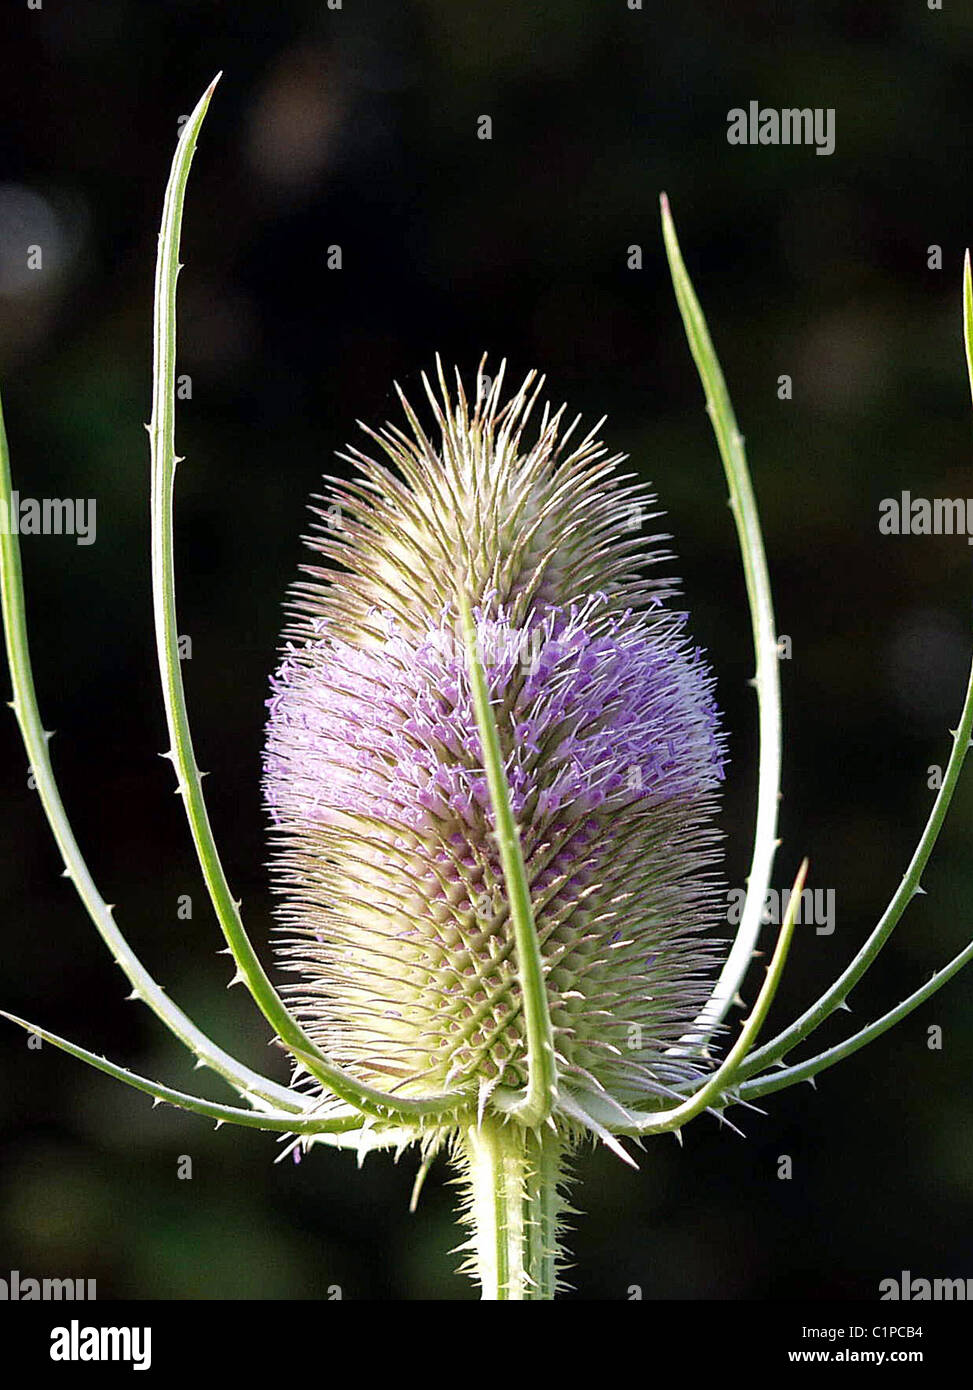 Classic photo of a teasel, showing formation of flower head. Stock Photo